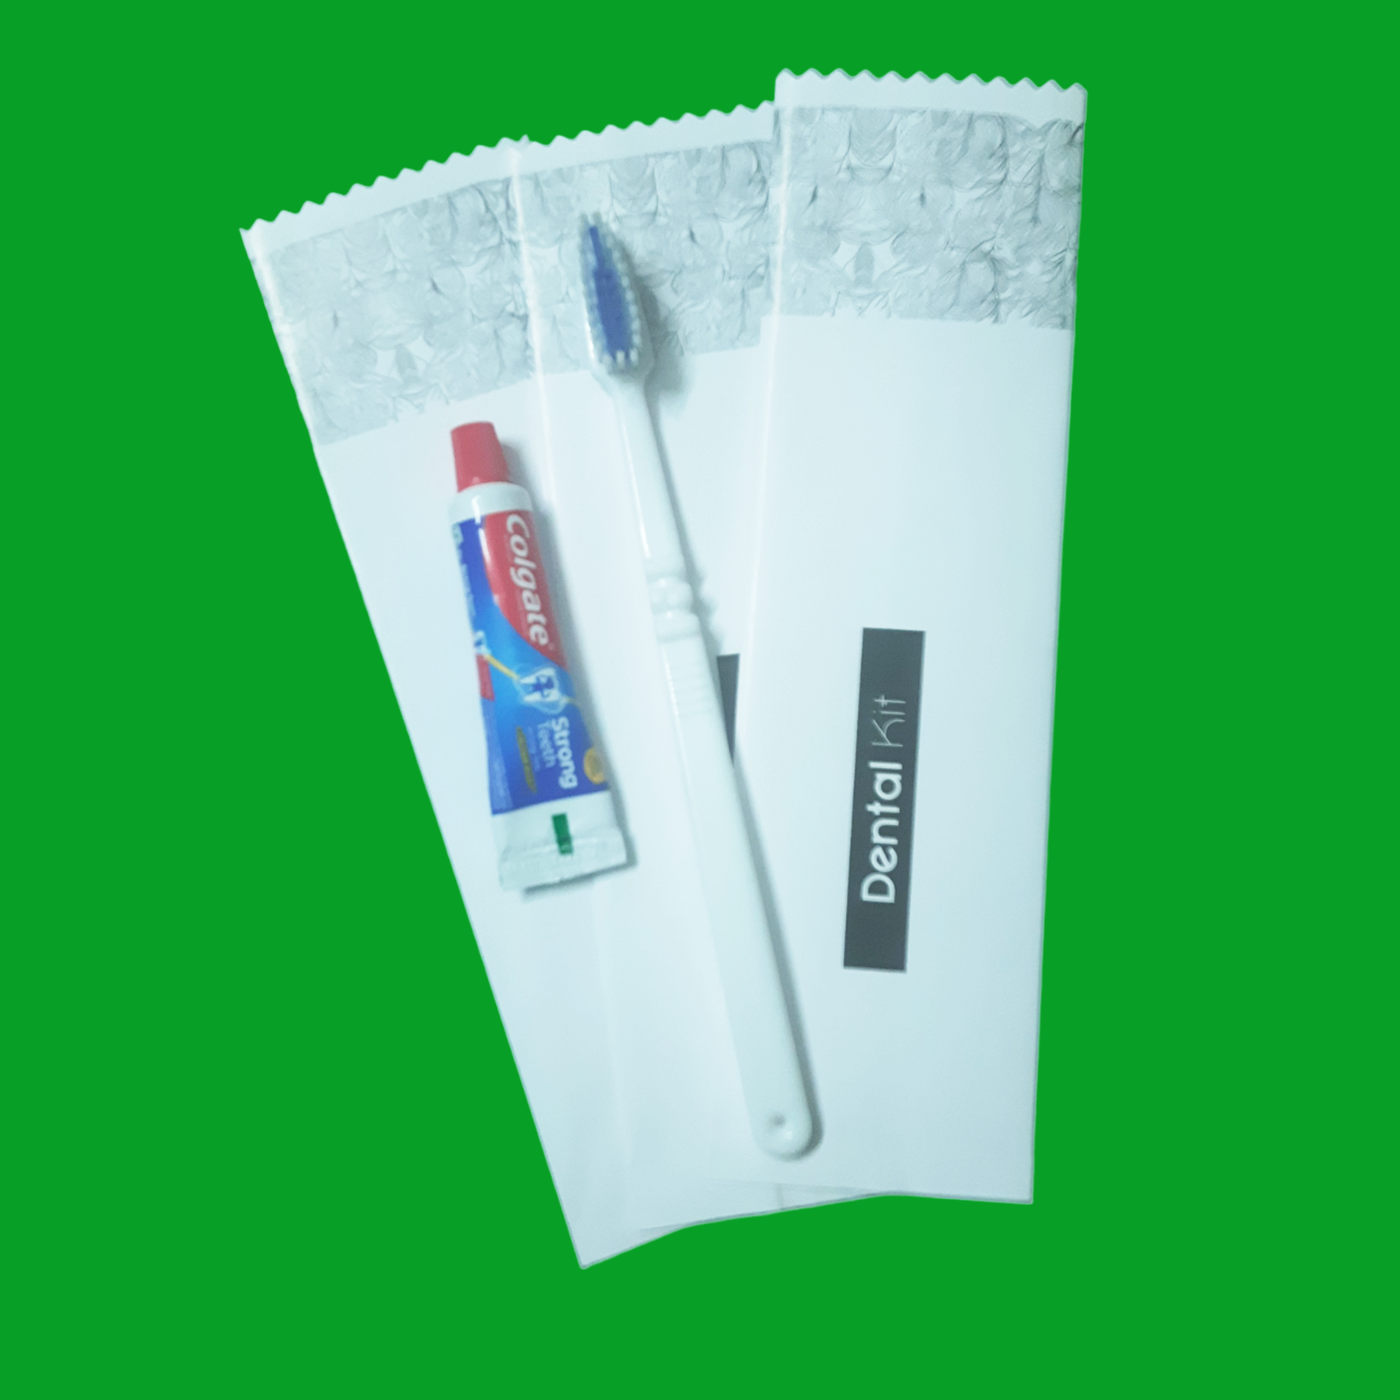 Dental Kit-48 pcs- with 12 grams Toothpaste - (48 Set) Dental Kit Set with paste & toothbrush- packed in eco friendly paper pouch-for Hotel -resorts-Guest-Toiletry use, for Travel,